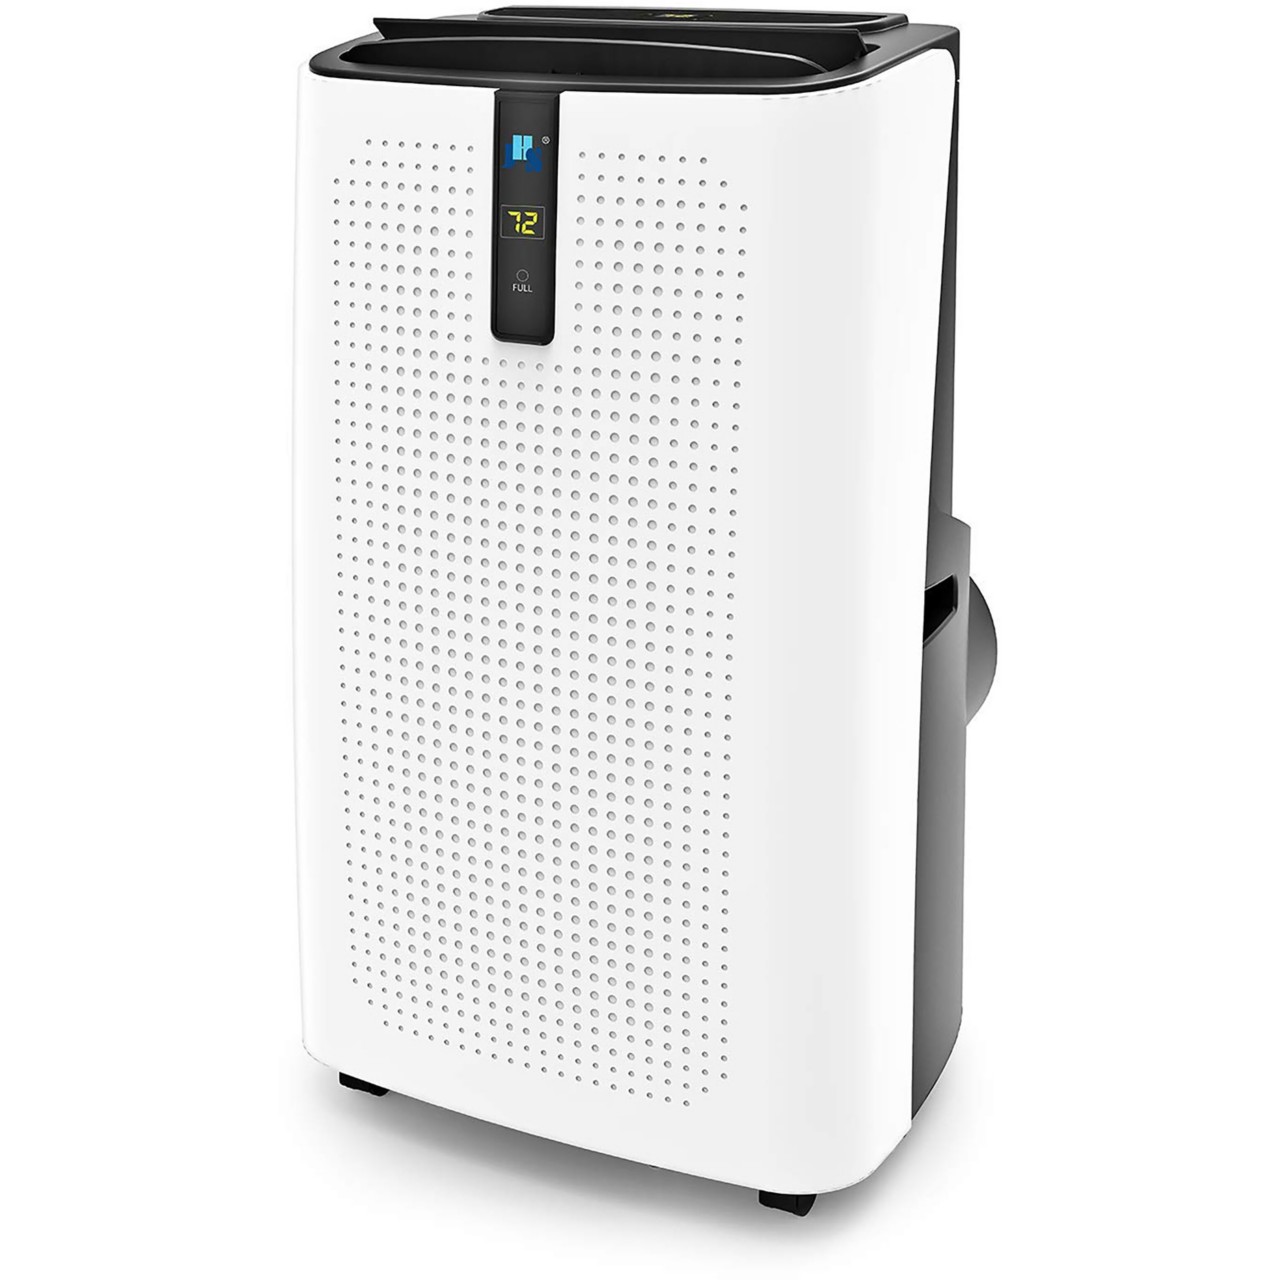 Image of a portable air conditioner that links to all air conditioners catalog.